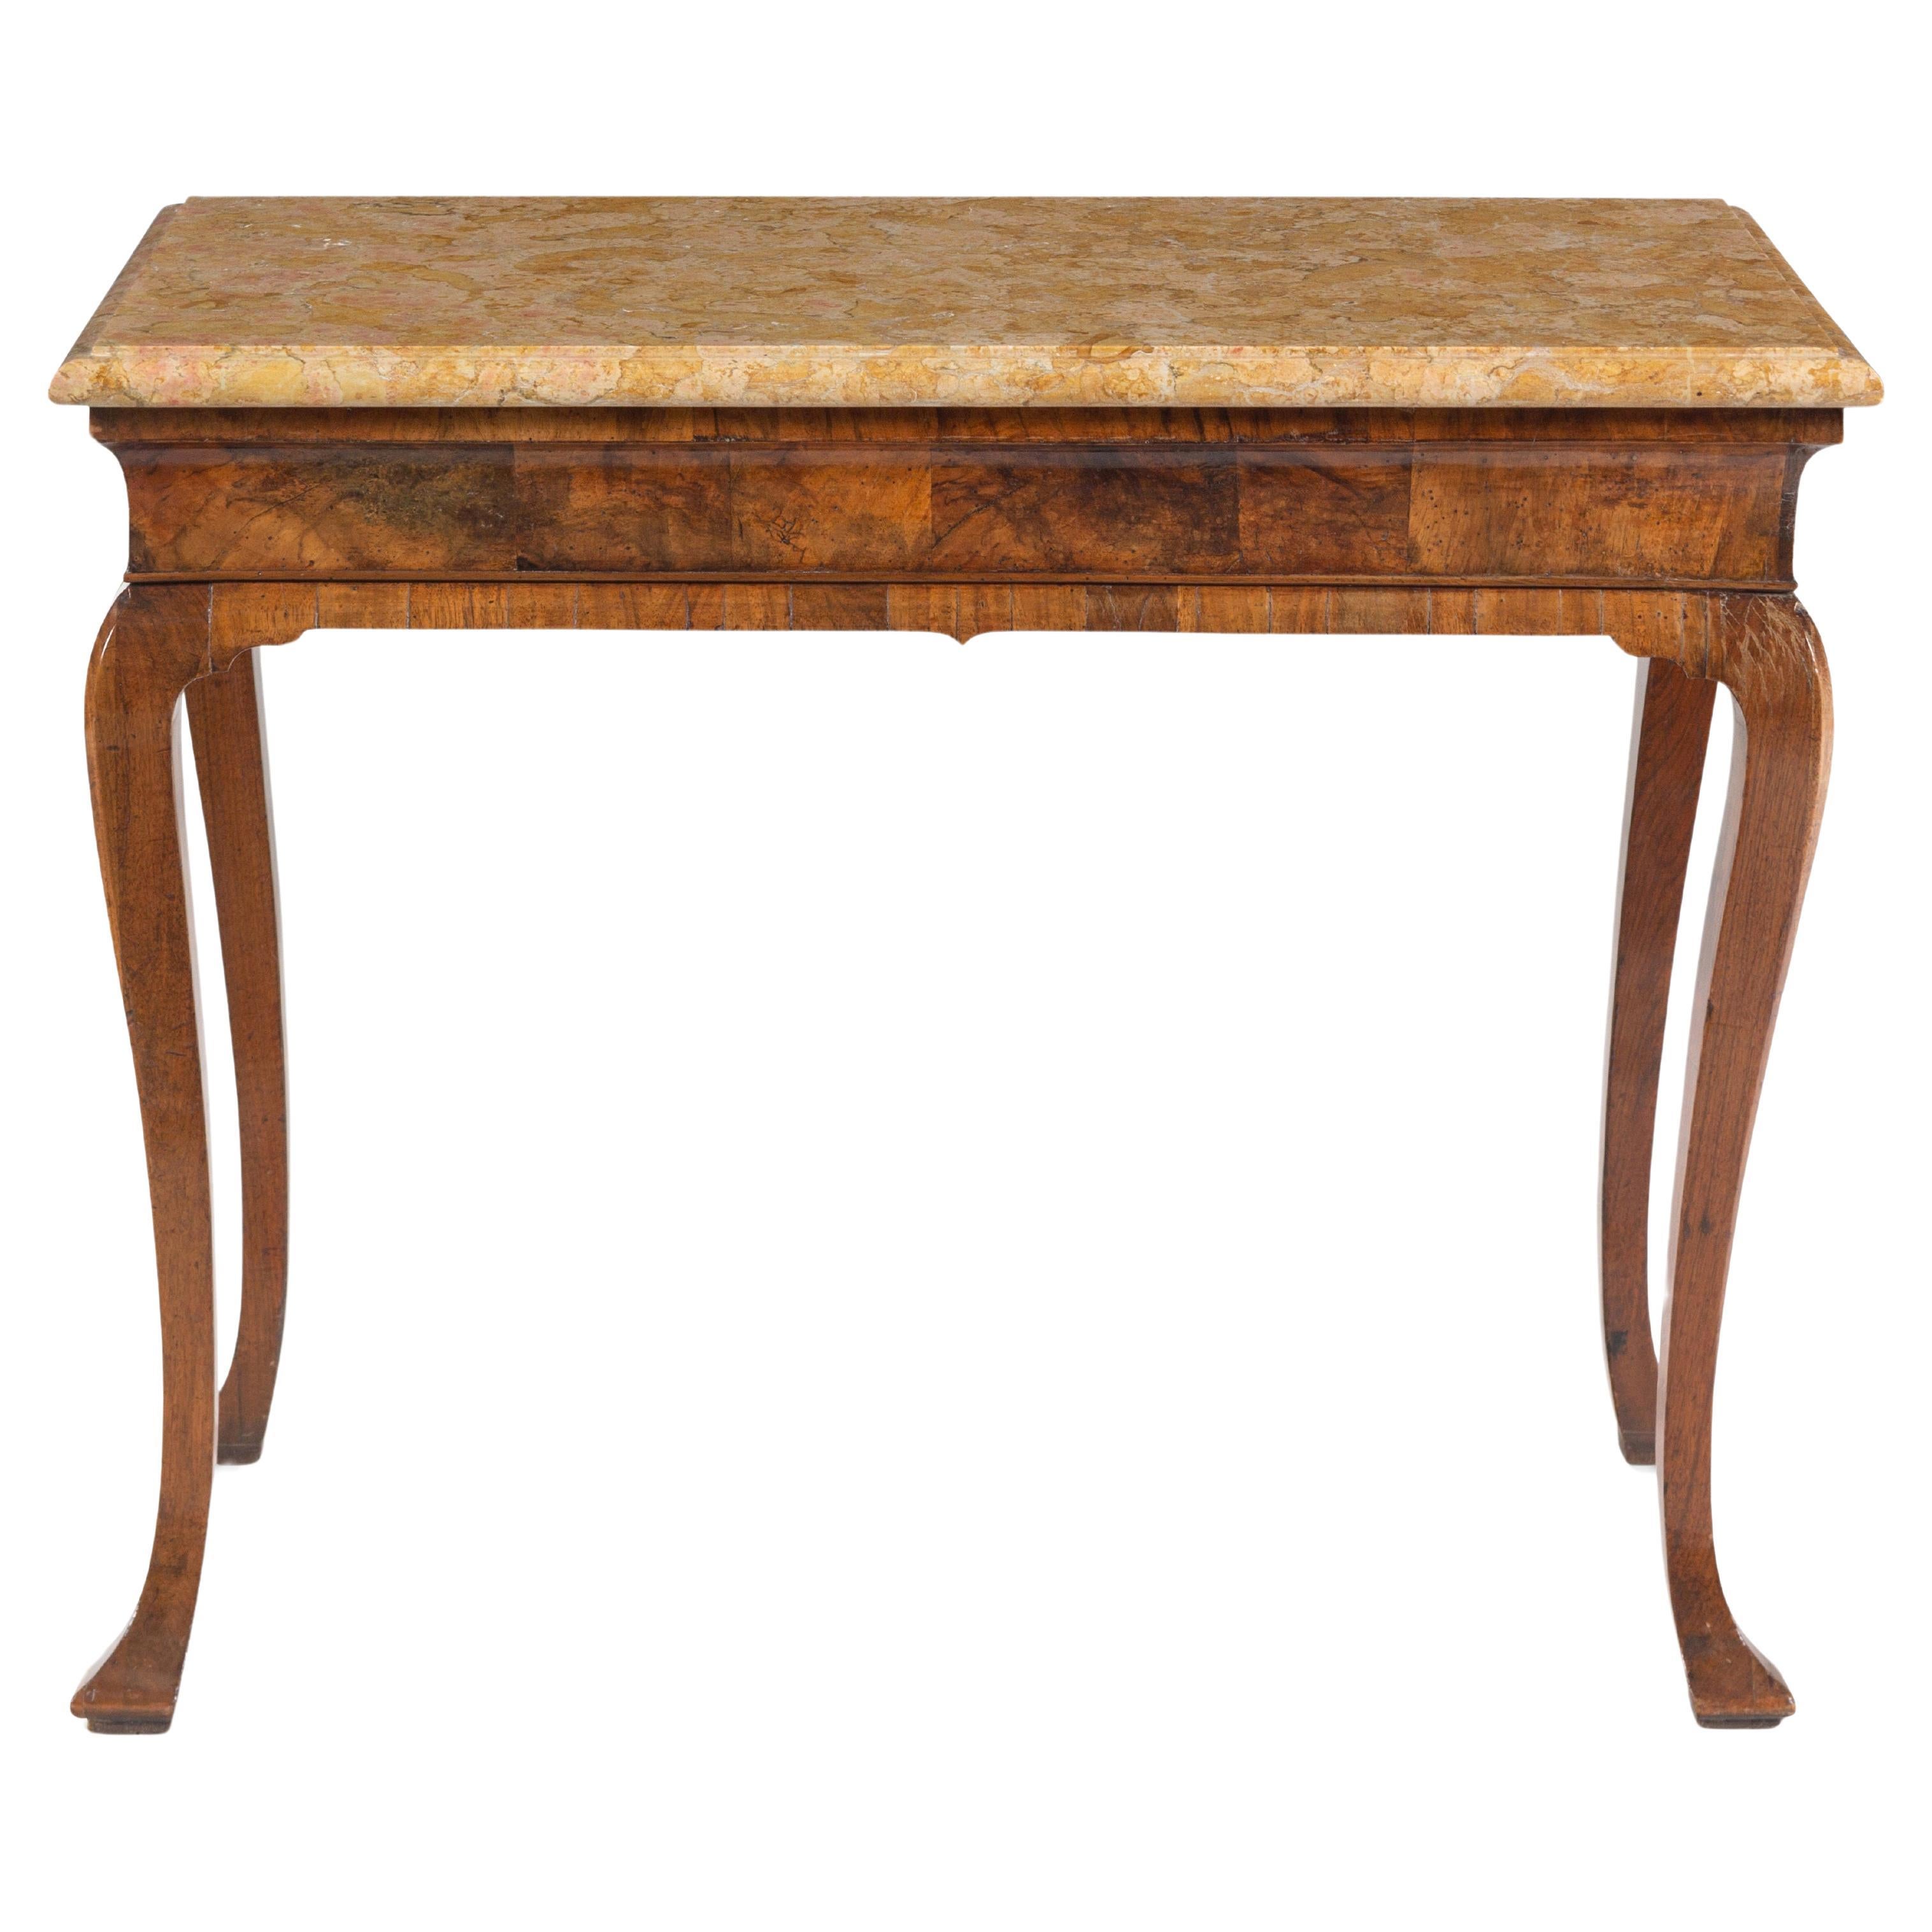 A fine George II figured walnut console table with Sienna Brocatelle marble top, circa 1740. England

The moulded Sienna Brocatelle marble sits over a figured walnut moulded cavetto frieze, raised on eared solid walnut legs terminating on shaped pad